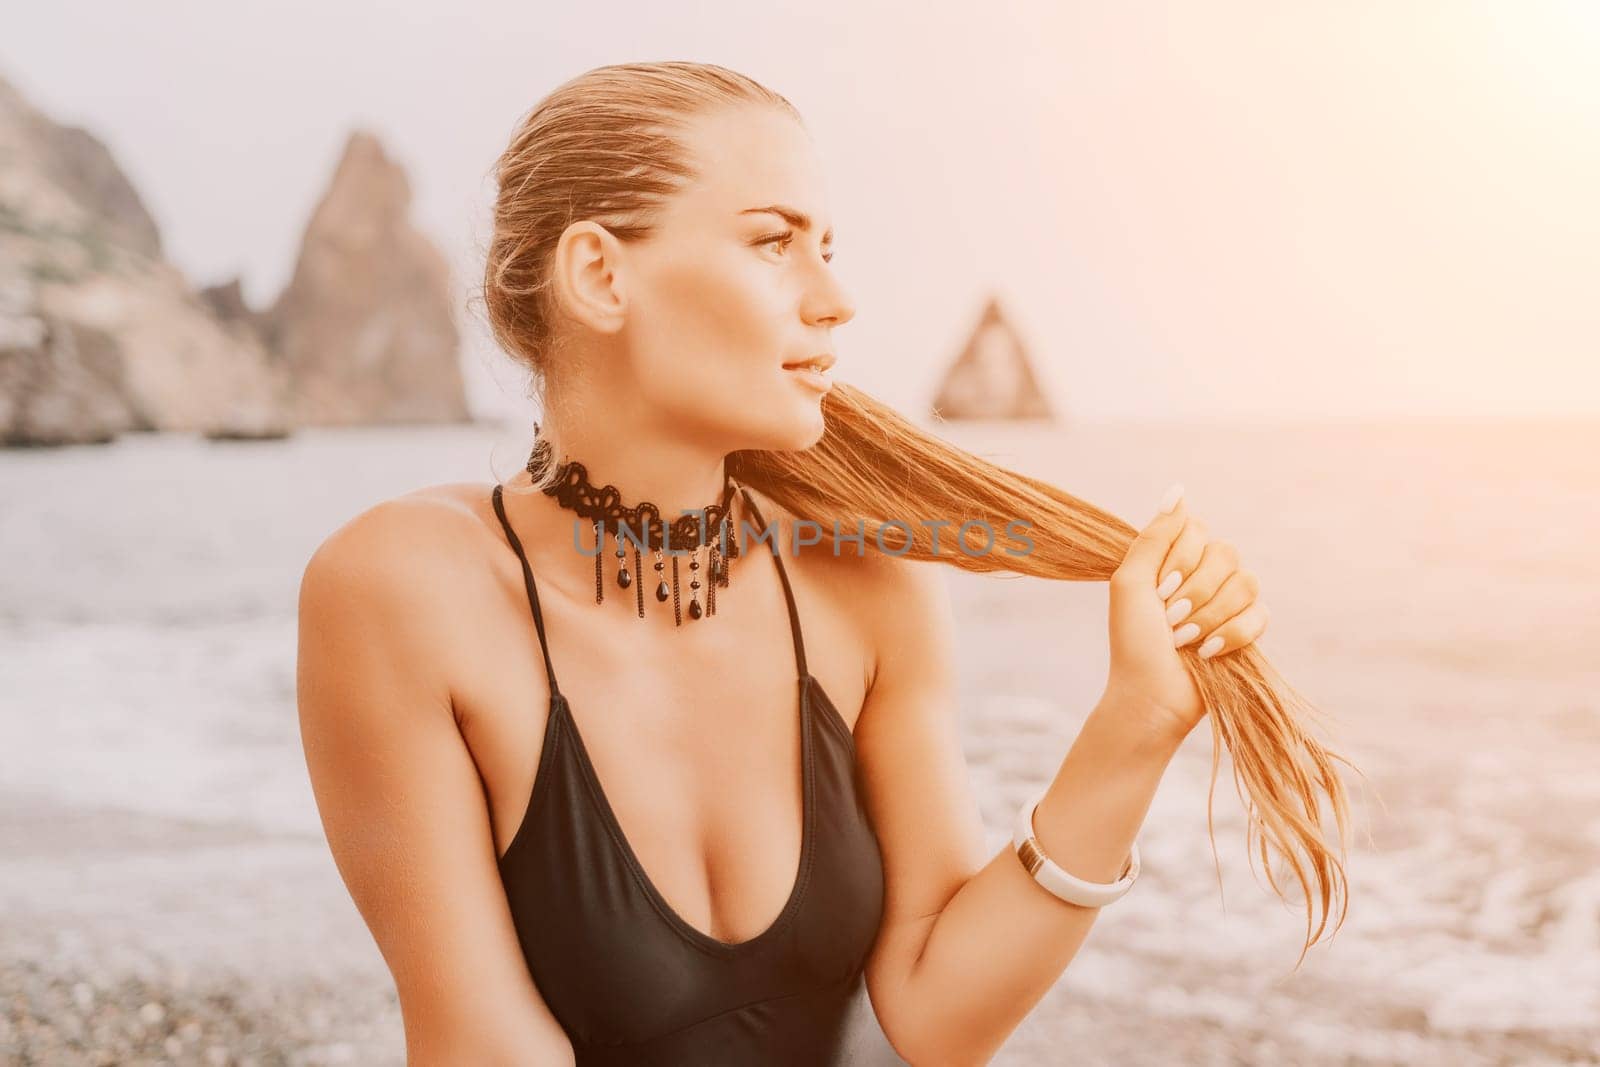 Woman travel portrait. Happy woman with long hair poses on a red volcanic rock at the beach. Close up portrait cute woman in black bikini, smiles at the camera, with the sea in the background